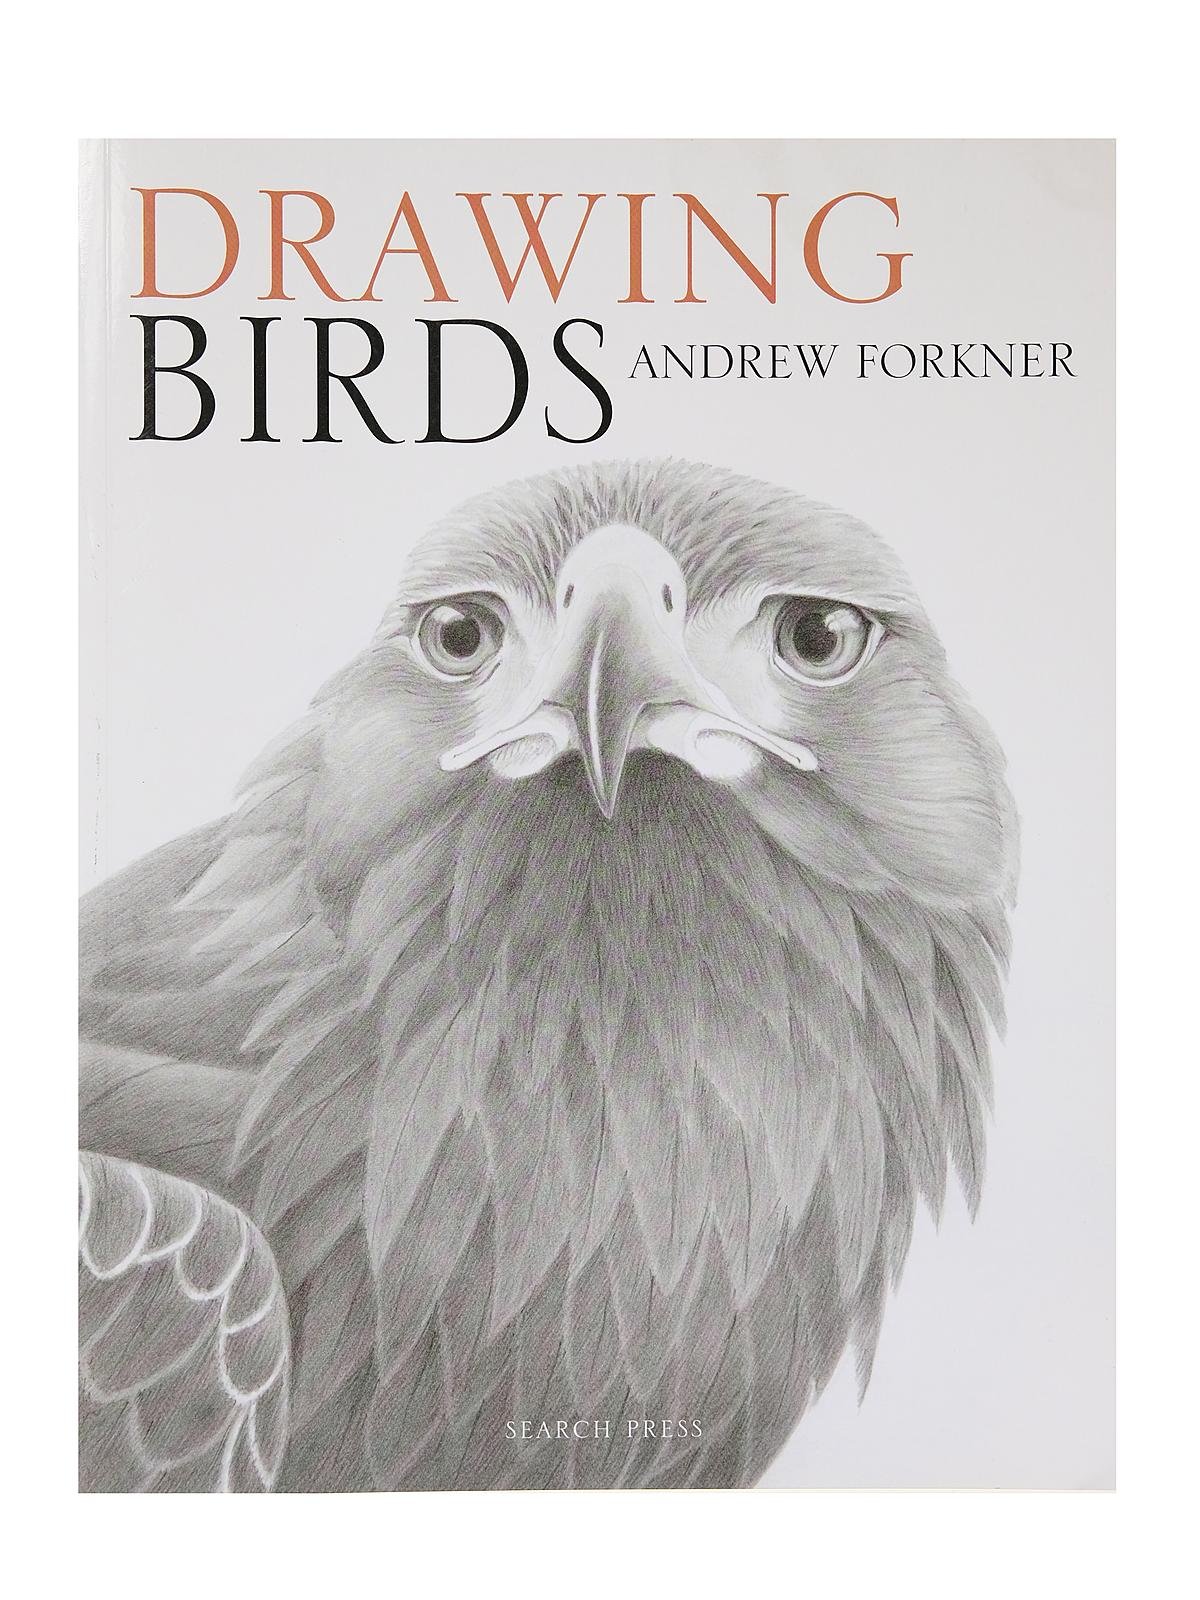 Search Press - Drawing Birds